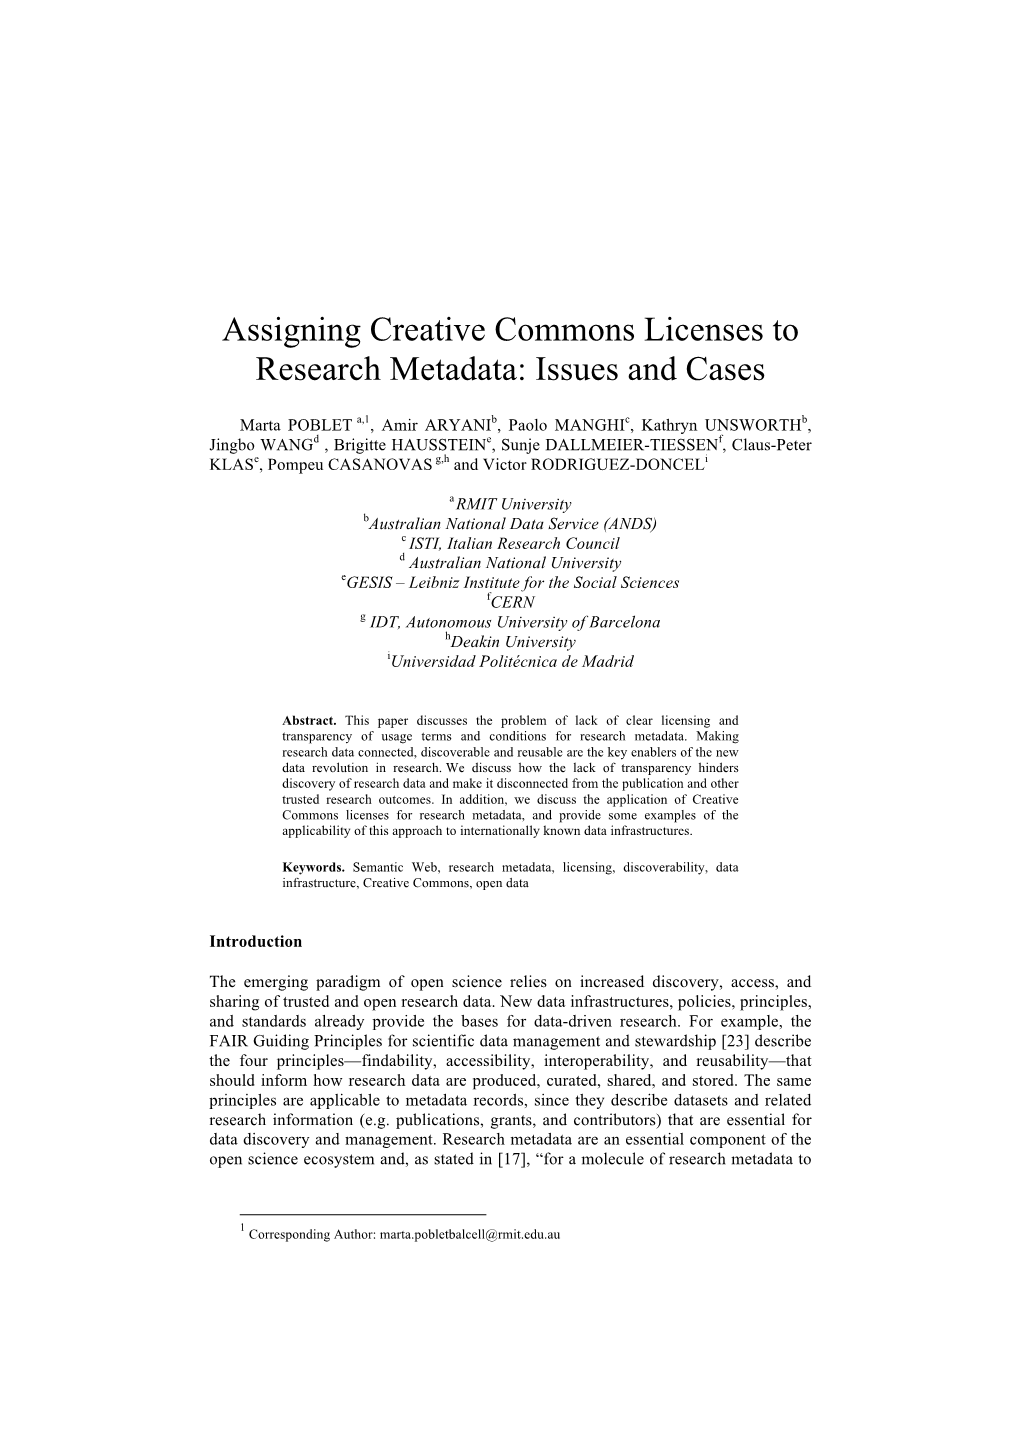 Assigning Creative Commons Licenses to Research Metadata: Issues and Cases